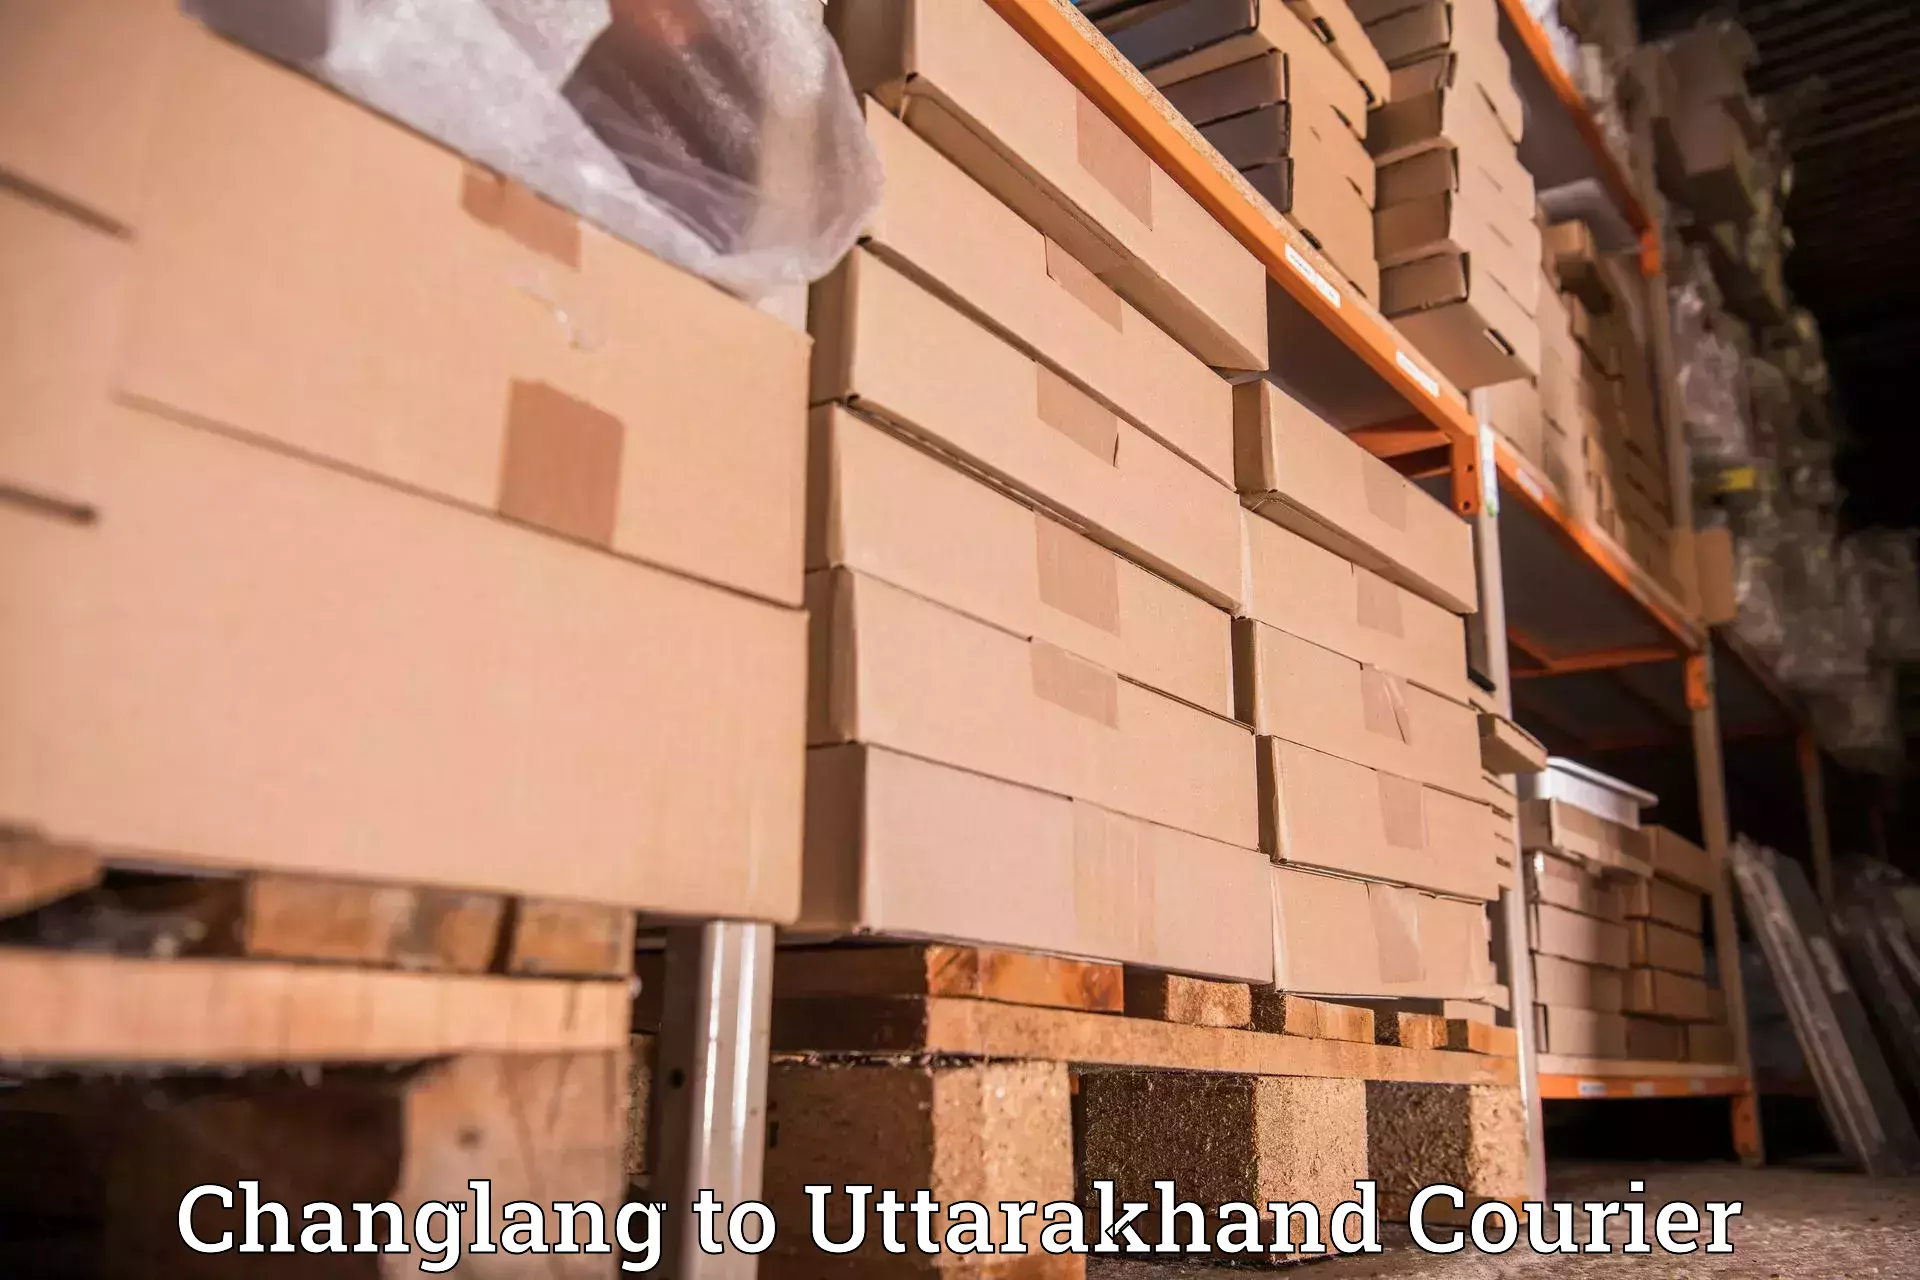 Multi-national courier services Changlang to Chamoli